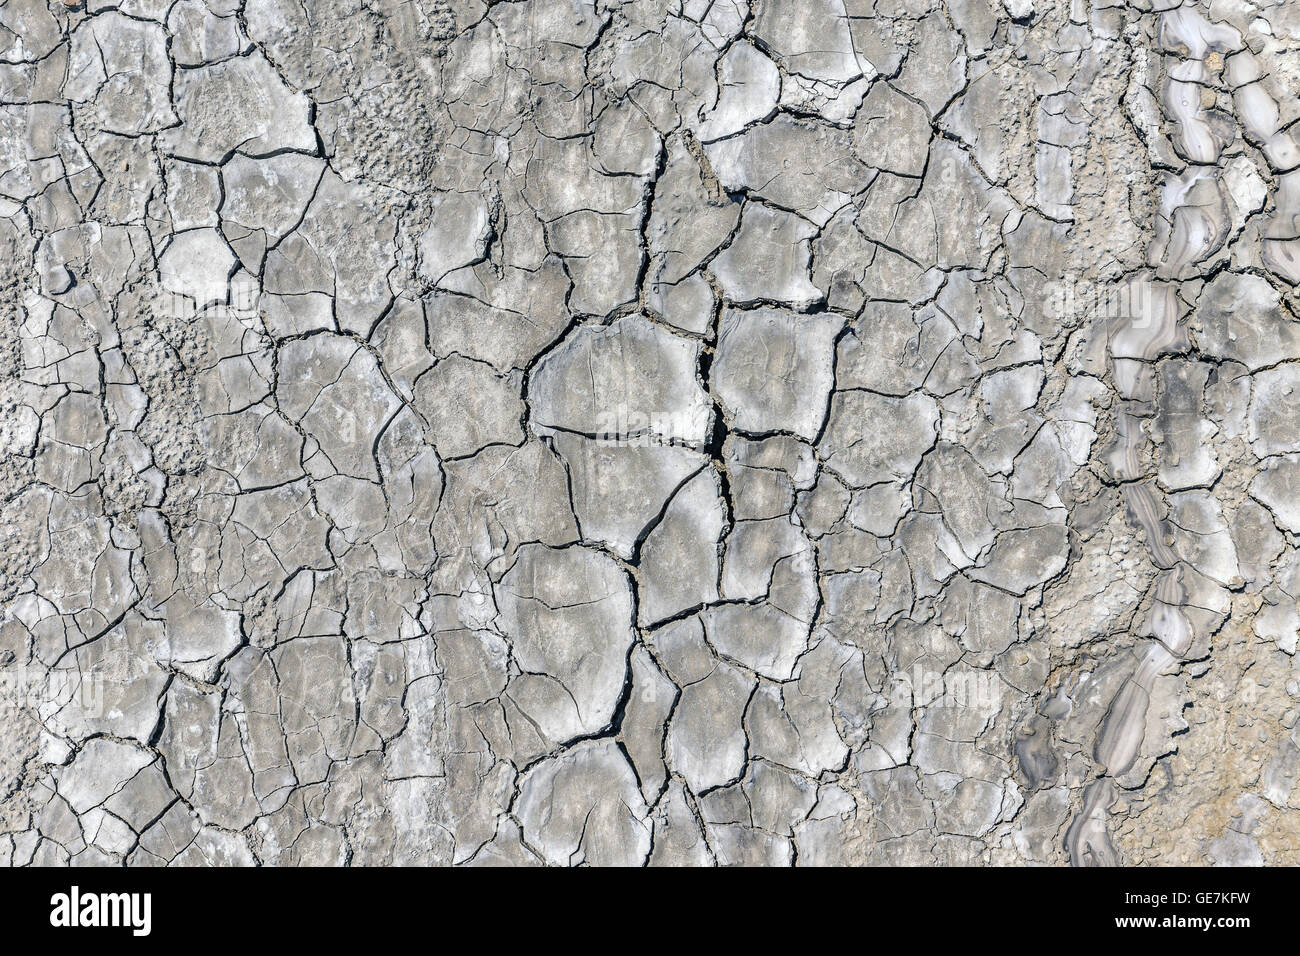 Top view shot of cracked soil Stock Photo